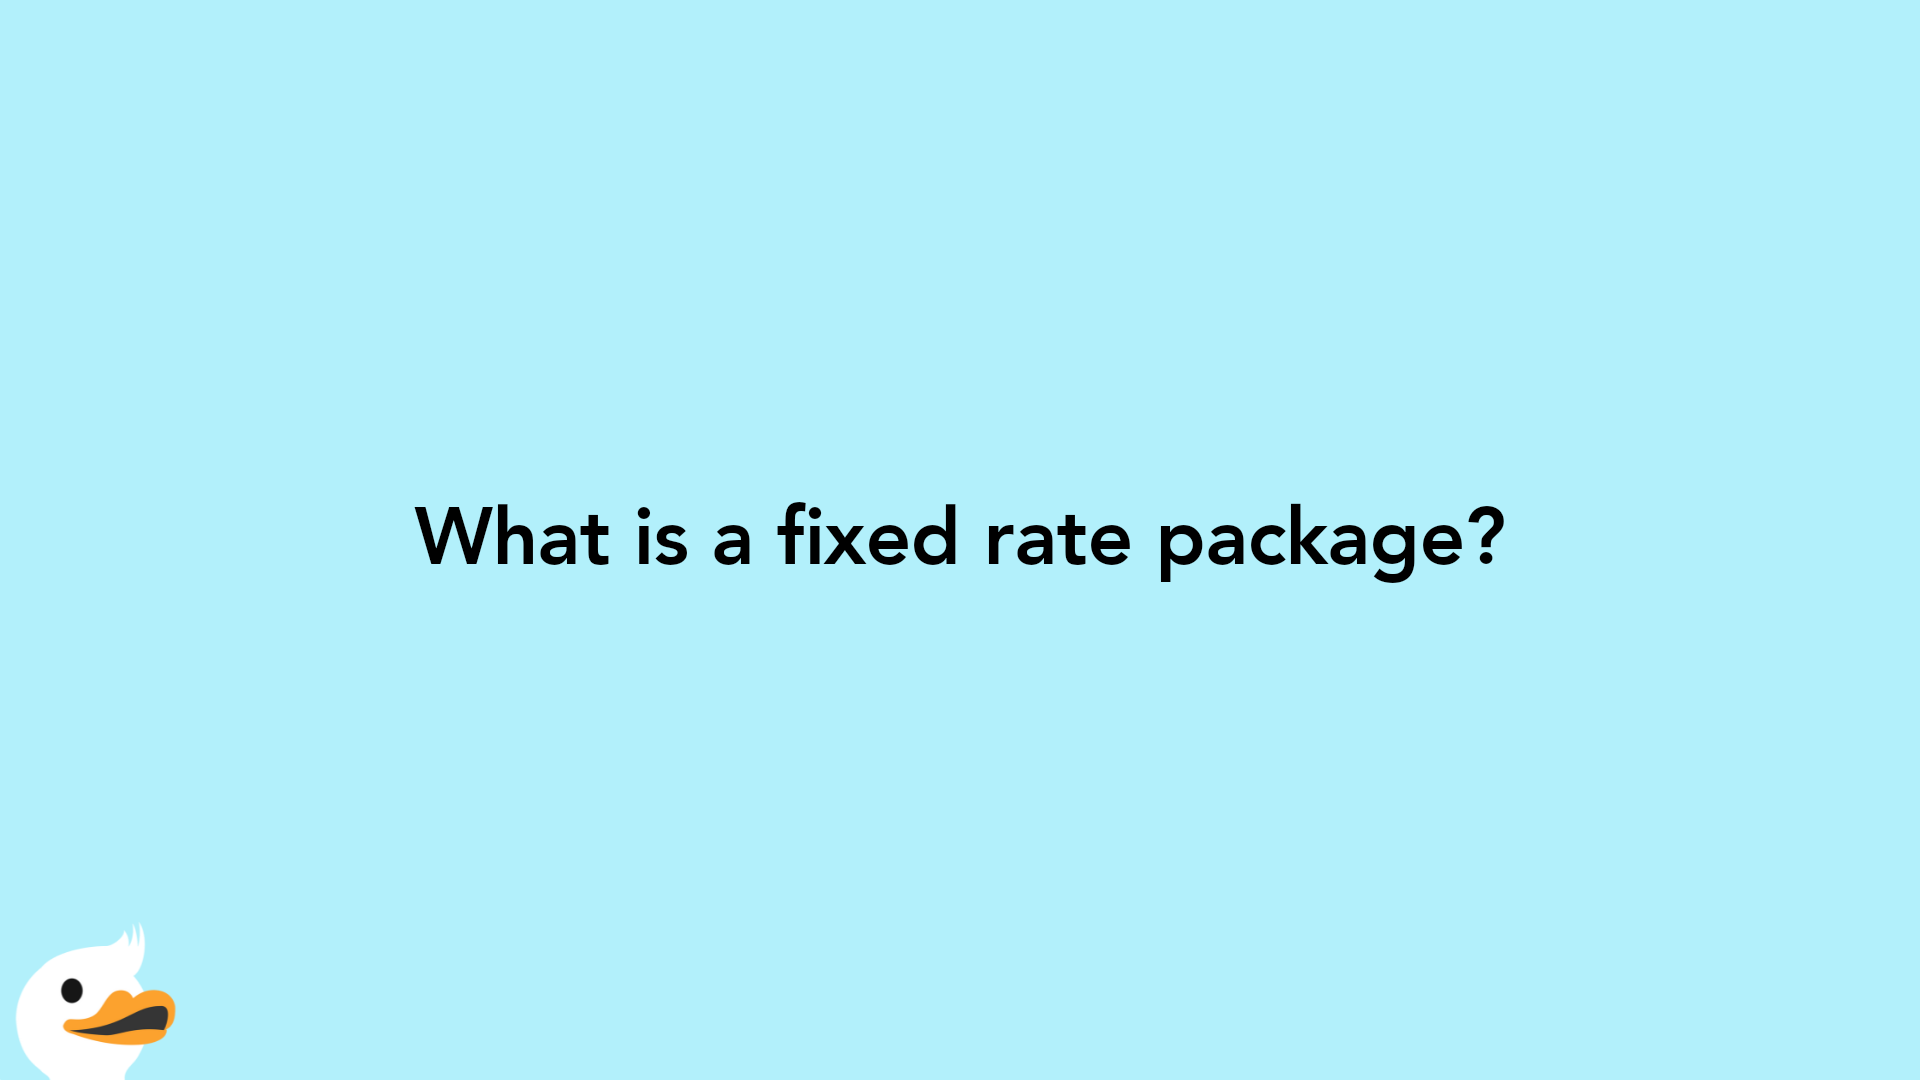 What is a fixed rate package?